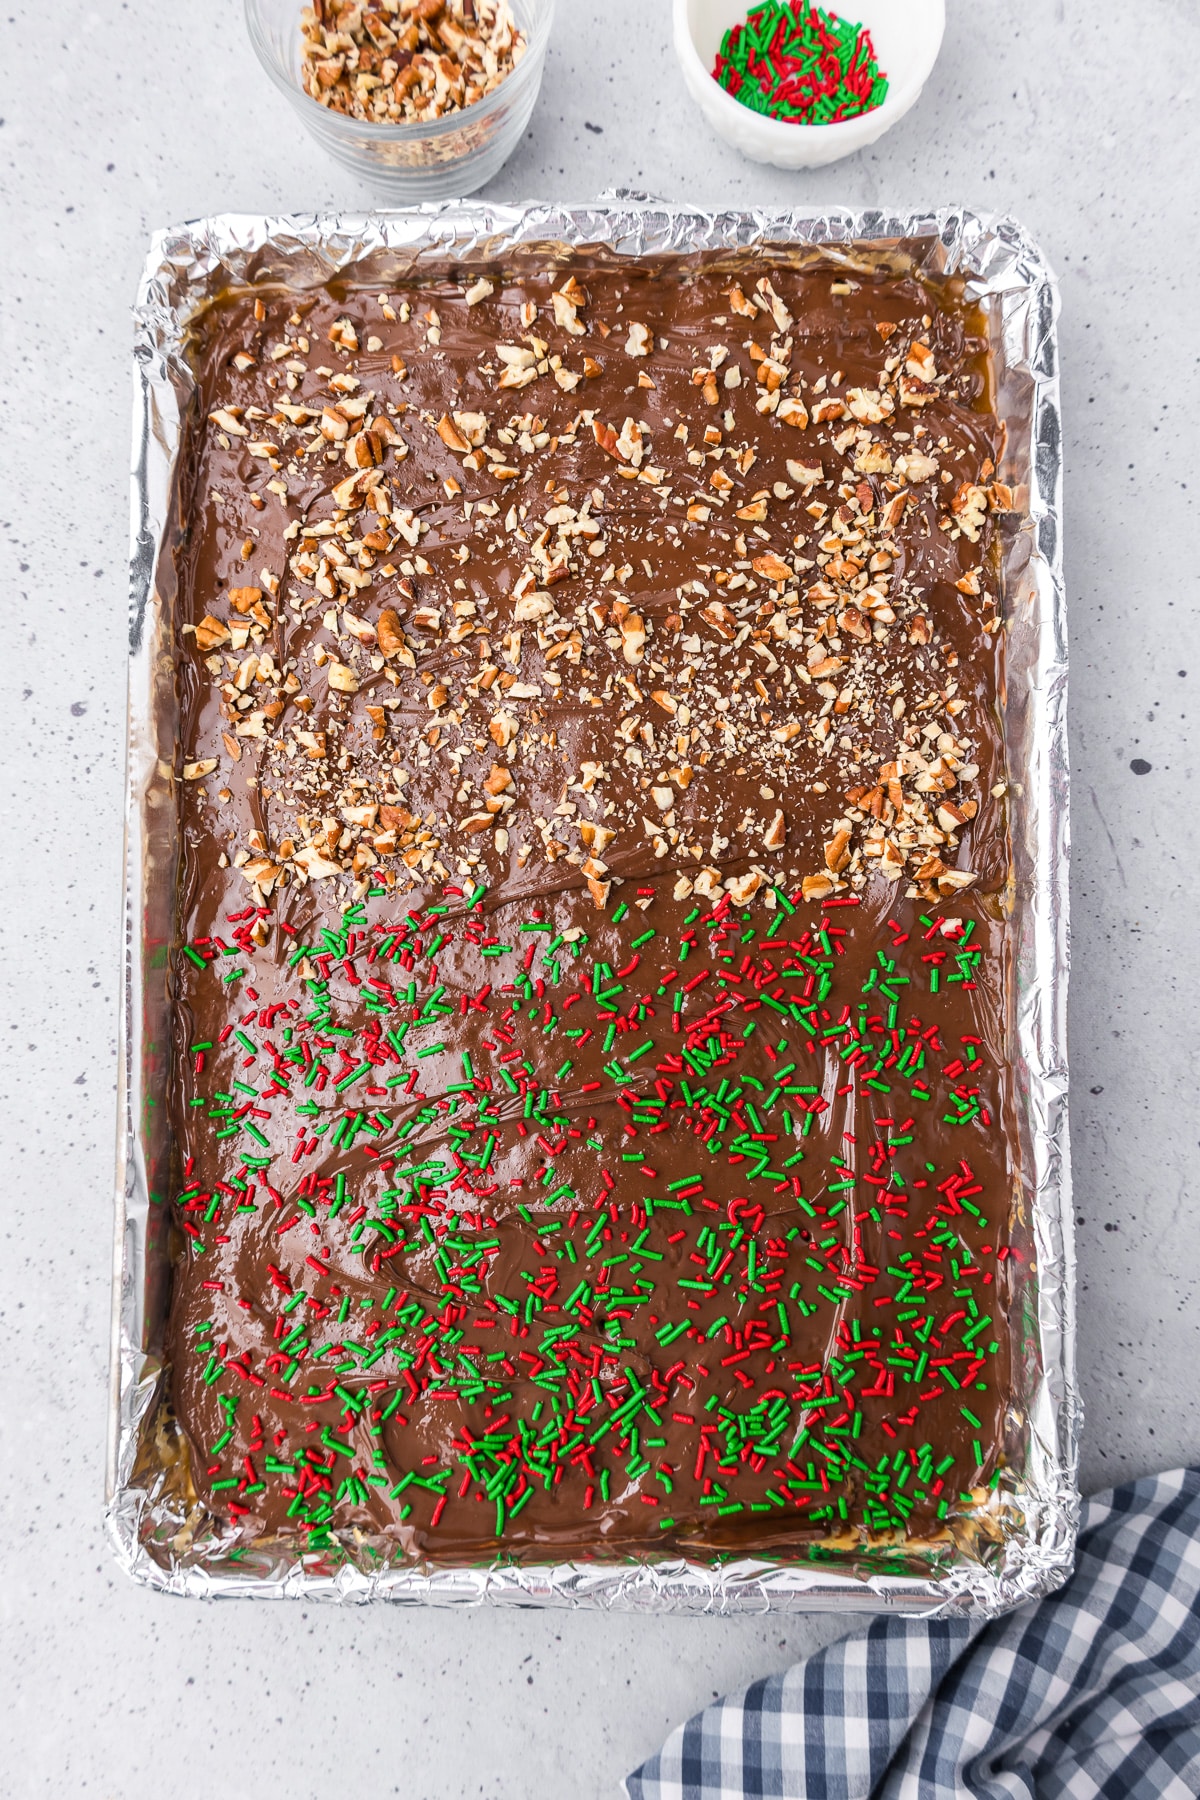 A pan of chocolate toffee half covered with sprinkles and half covered with pecans.